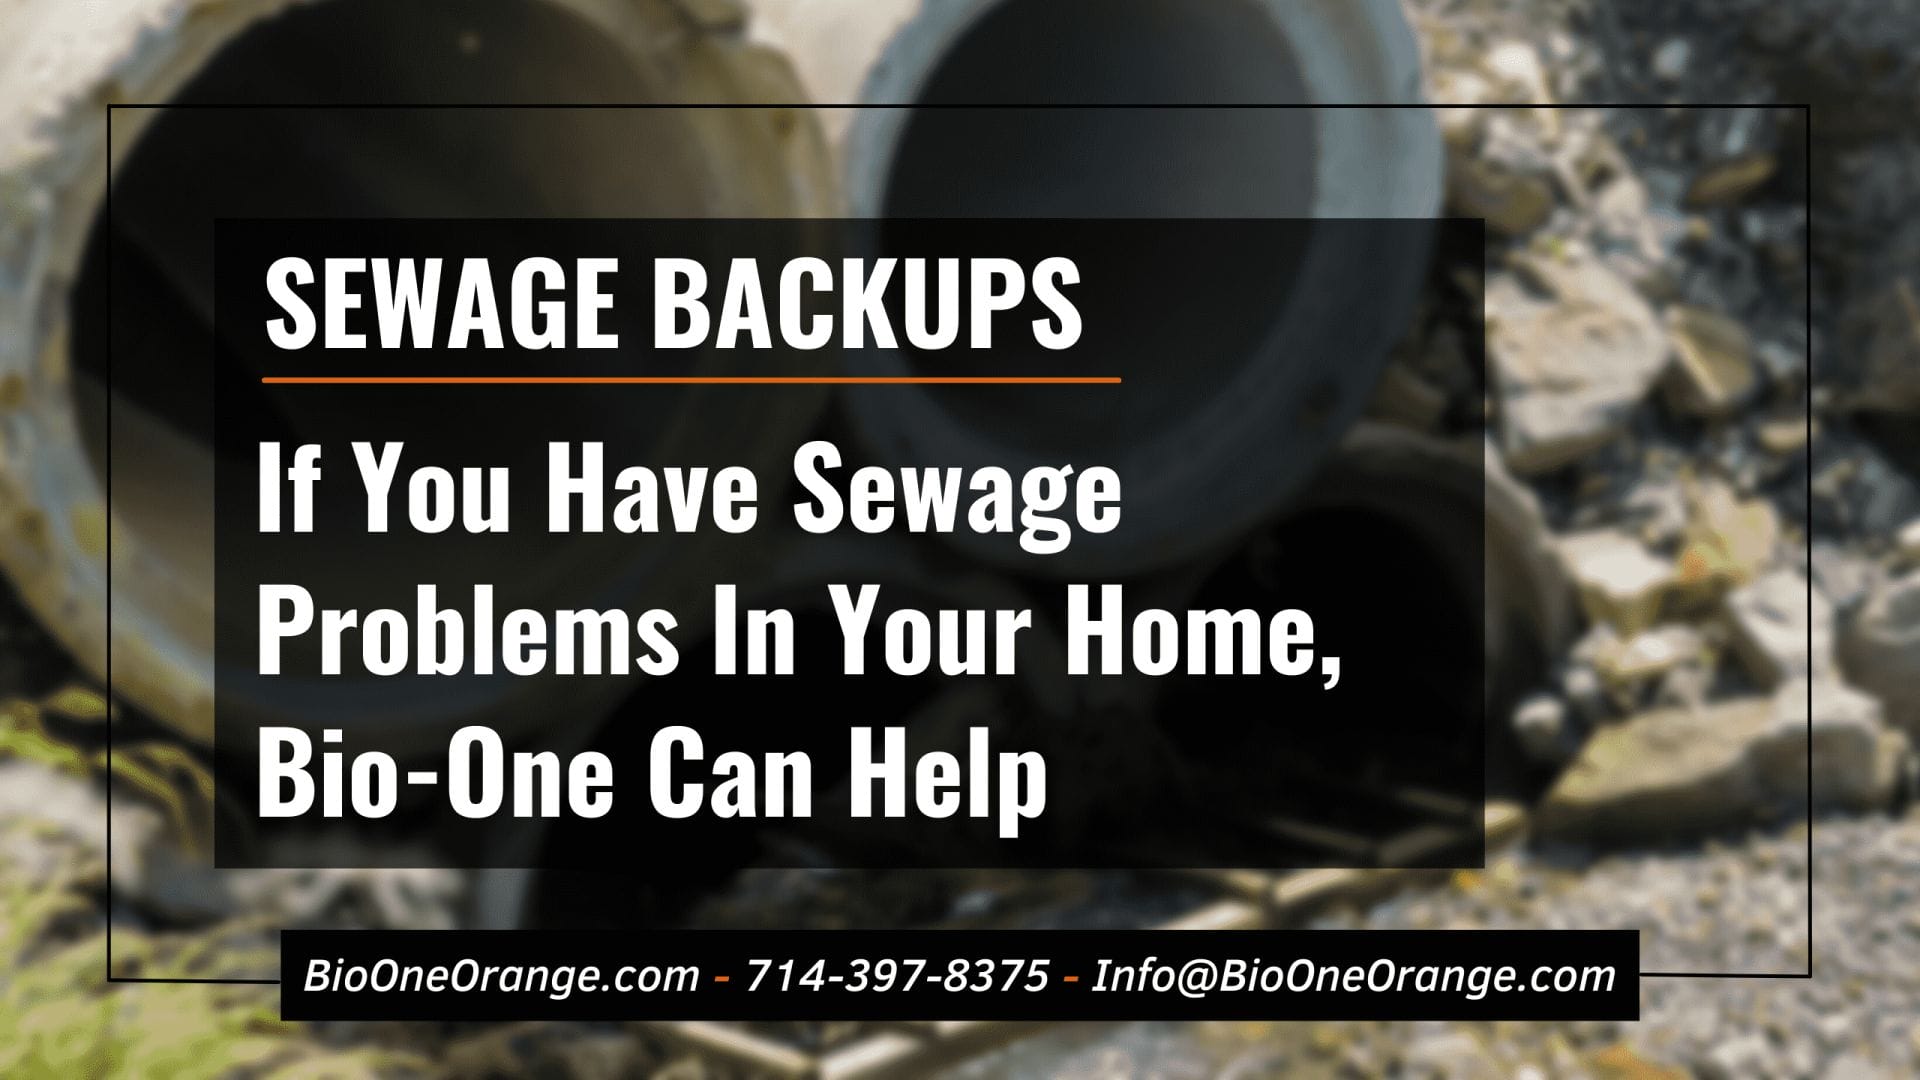 If You Have Sewage Problems In Your Home, Bio-One Can Help. Photo credit: @user3222645 - Freepik / Bio-One of Orange.